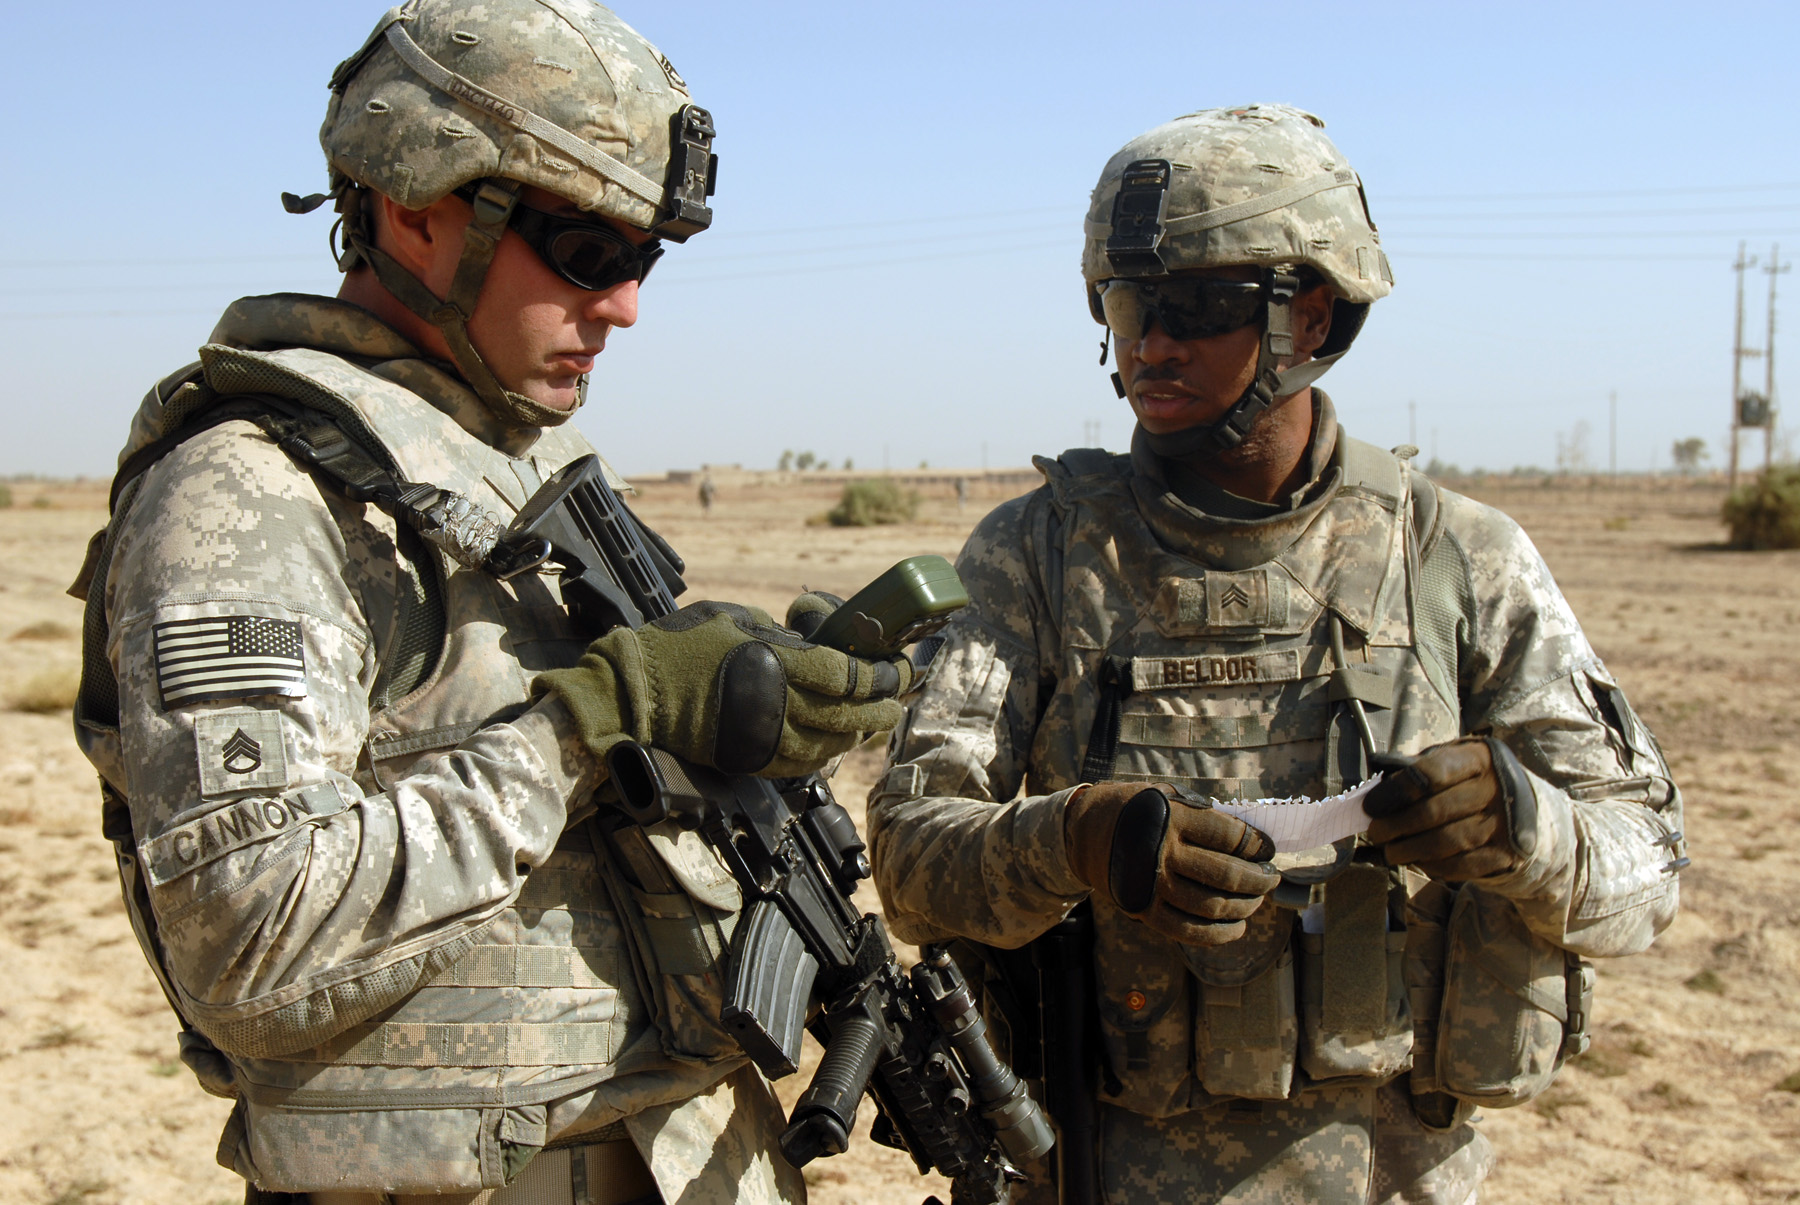 US_Army_52935_TAJI,_Iraq_-_Staff_Sgt._William_Cannon_(left),_of_Taylor,_Mich.,_and_Sgt._Jhonny_Beldor,_of_Fredericksburg,_Pa.,_confer_about_directions_during_a_patrol_near_Taji_Oct._5._Both_non-commissioned_officer.jpg